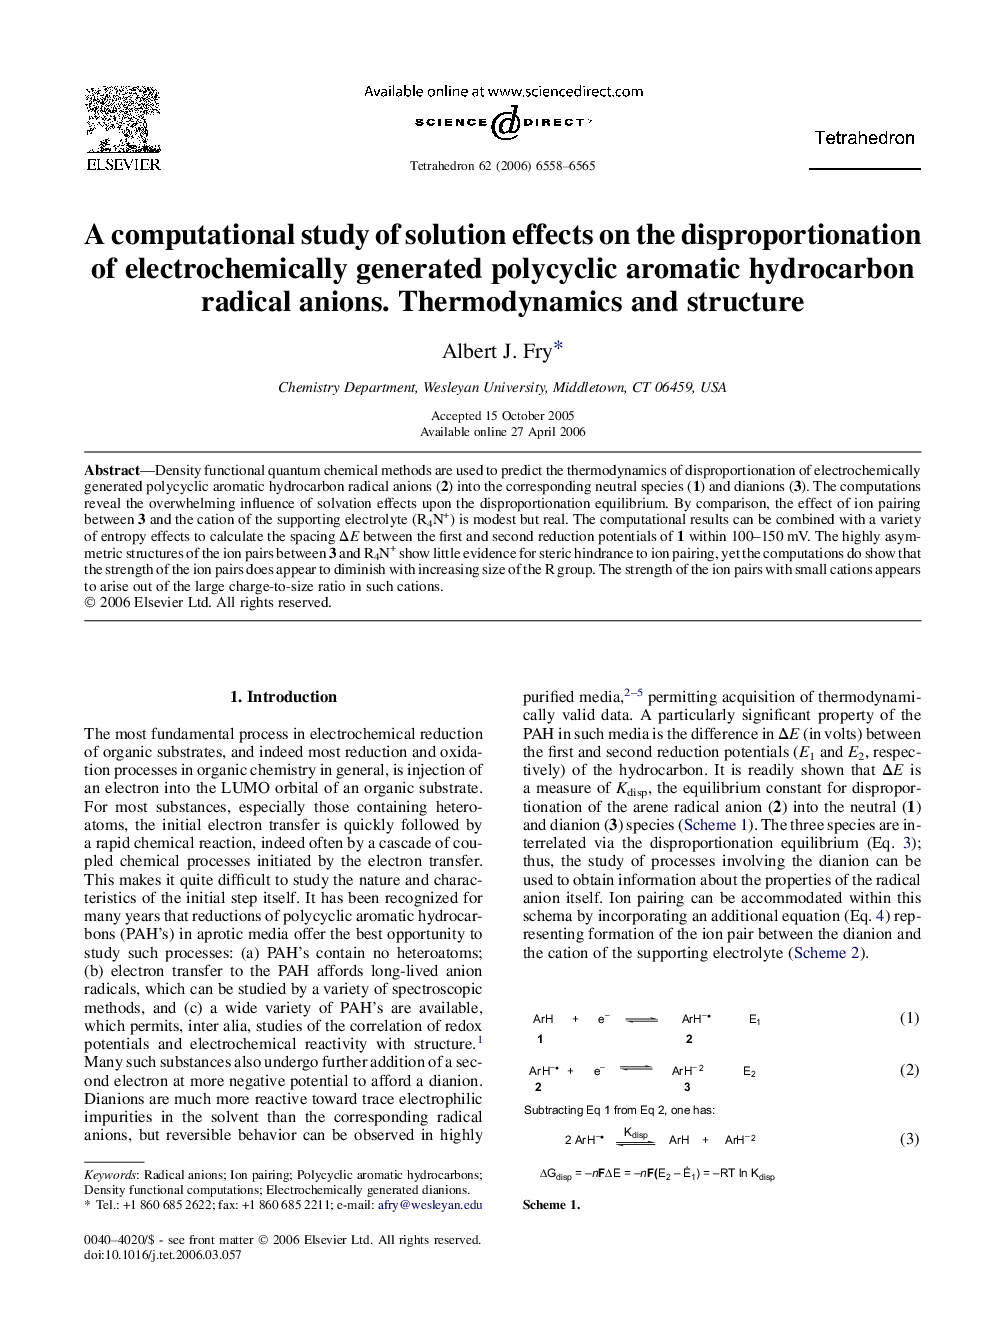 A computational study of solution effects on the disproportionation of electrochemically generated polycyclic aromatic hydrocarbon radical anions. Thermodynamics and structure